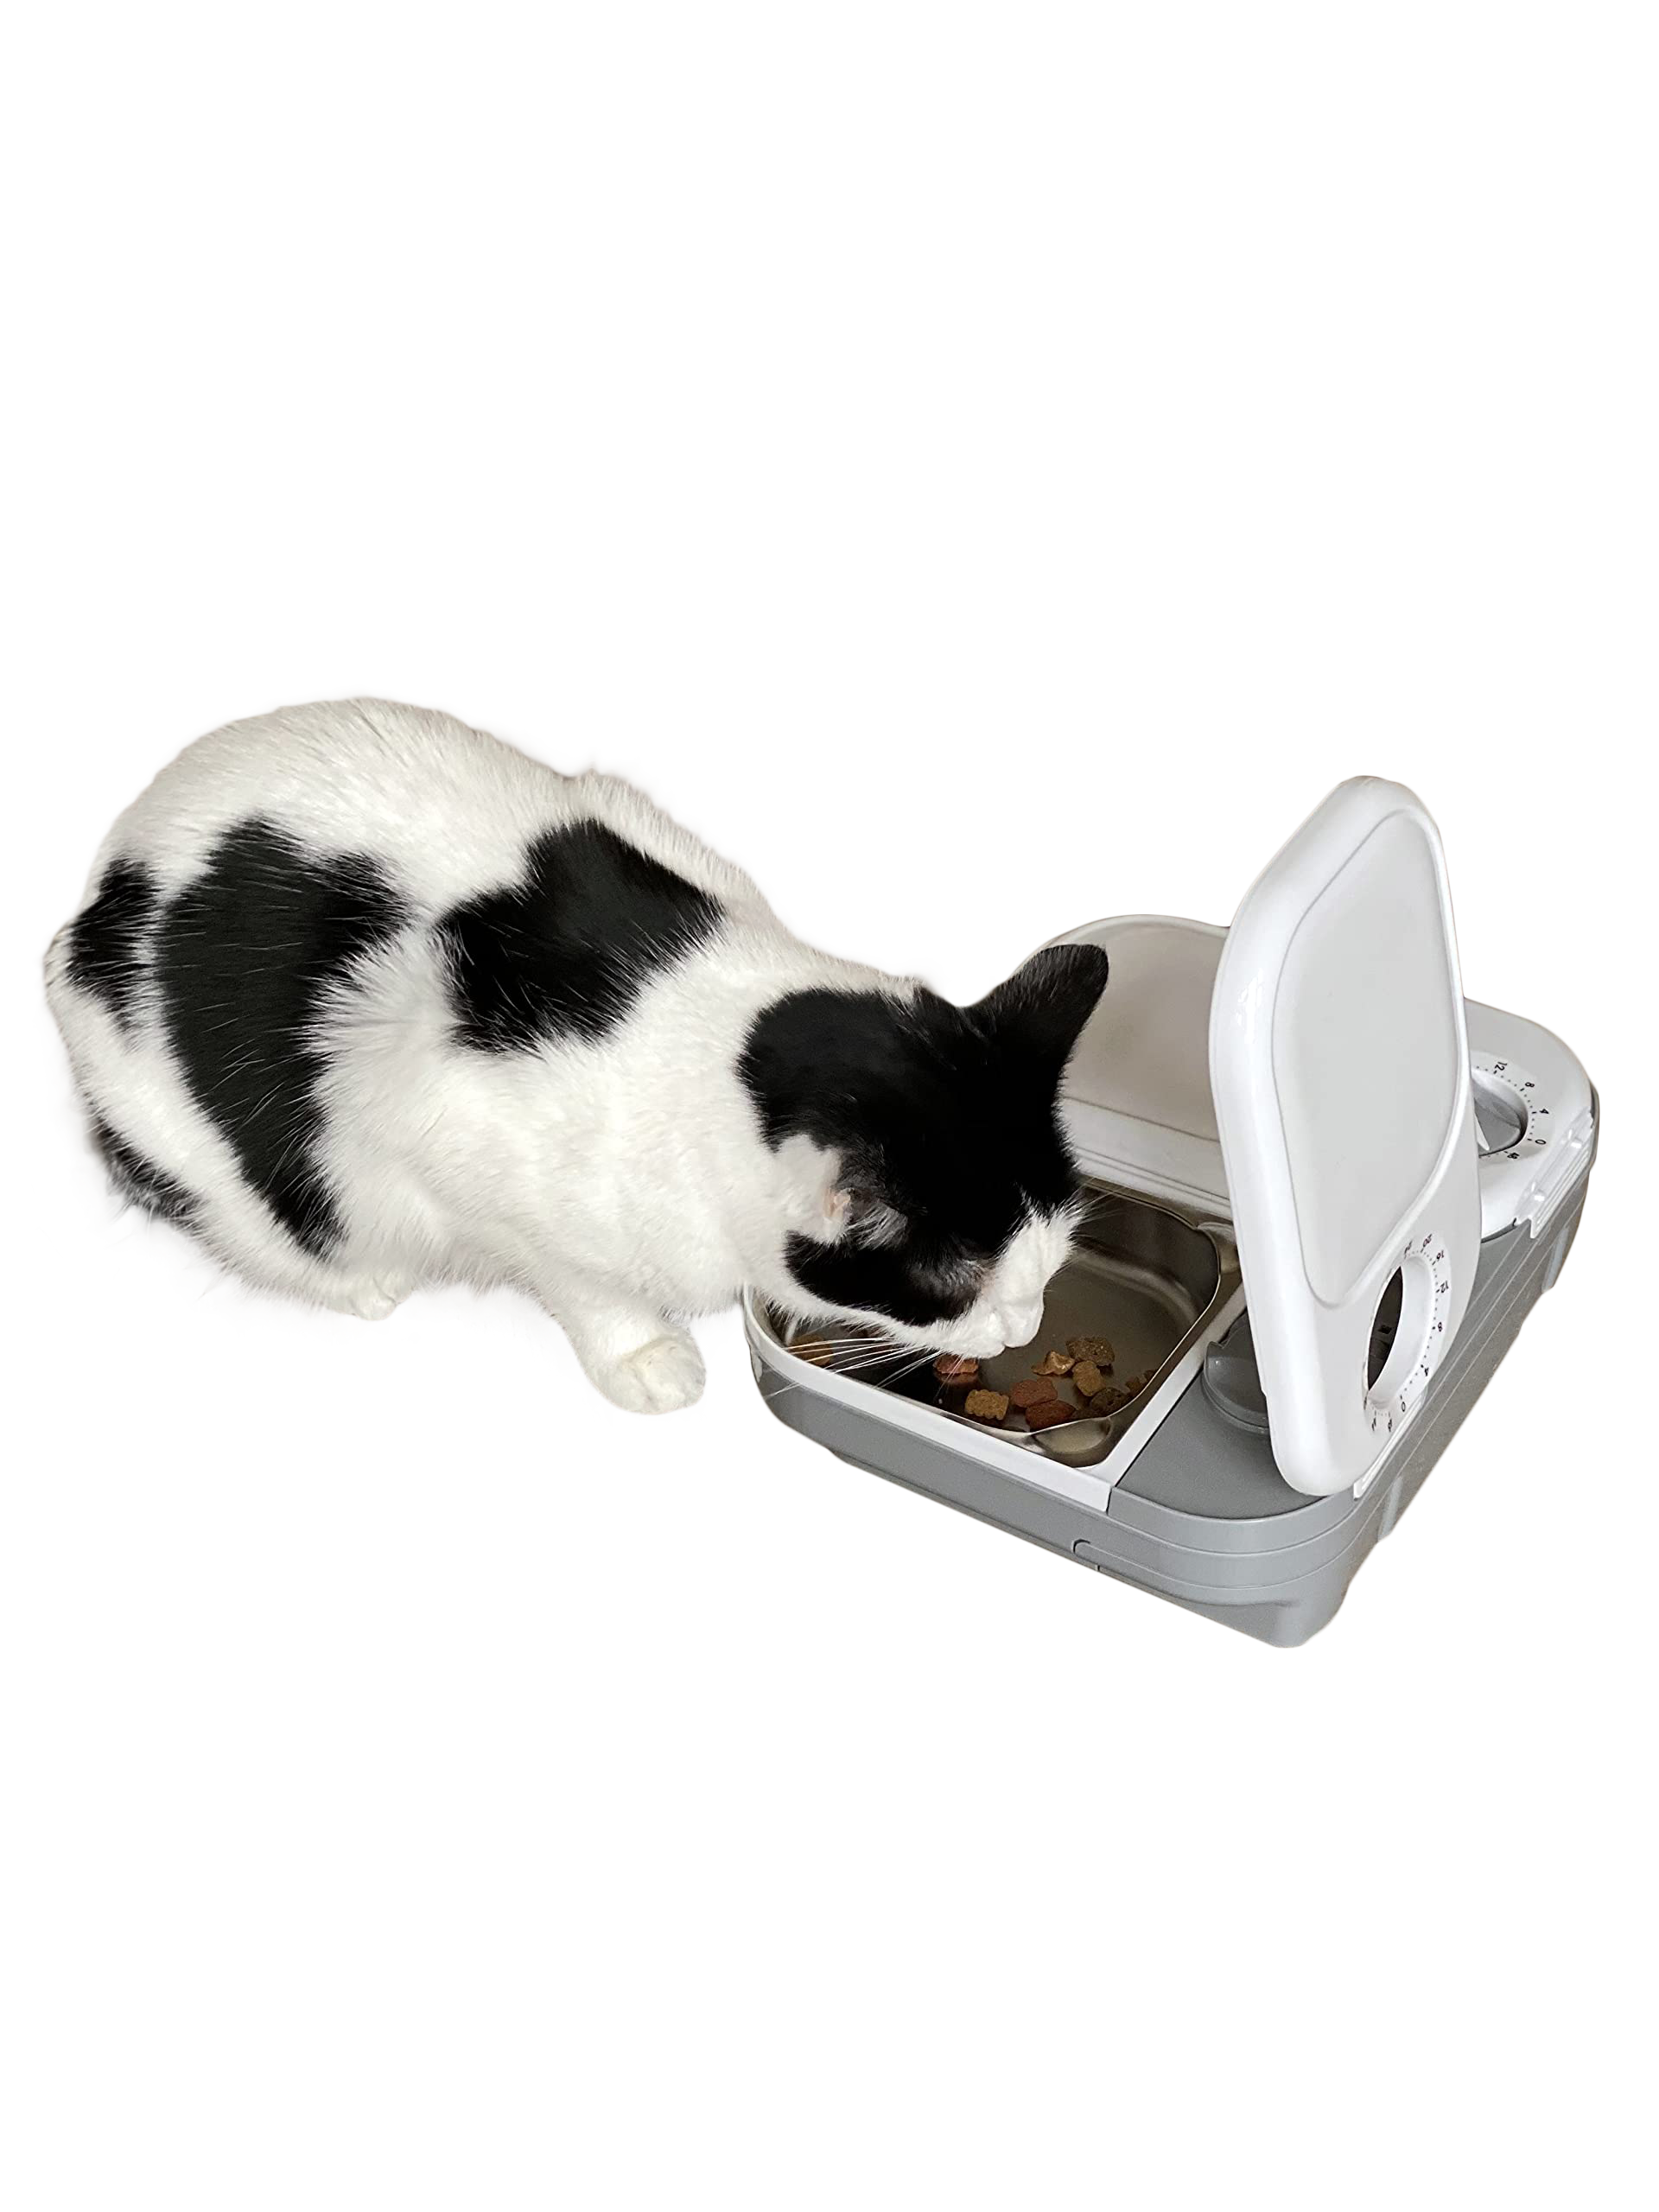 Closer Pets Two-Meal Automatic Dry/Wet Food Pet Feeder with Stainless Steel Bowl Inserts (C200)